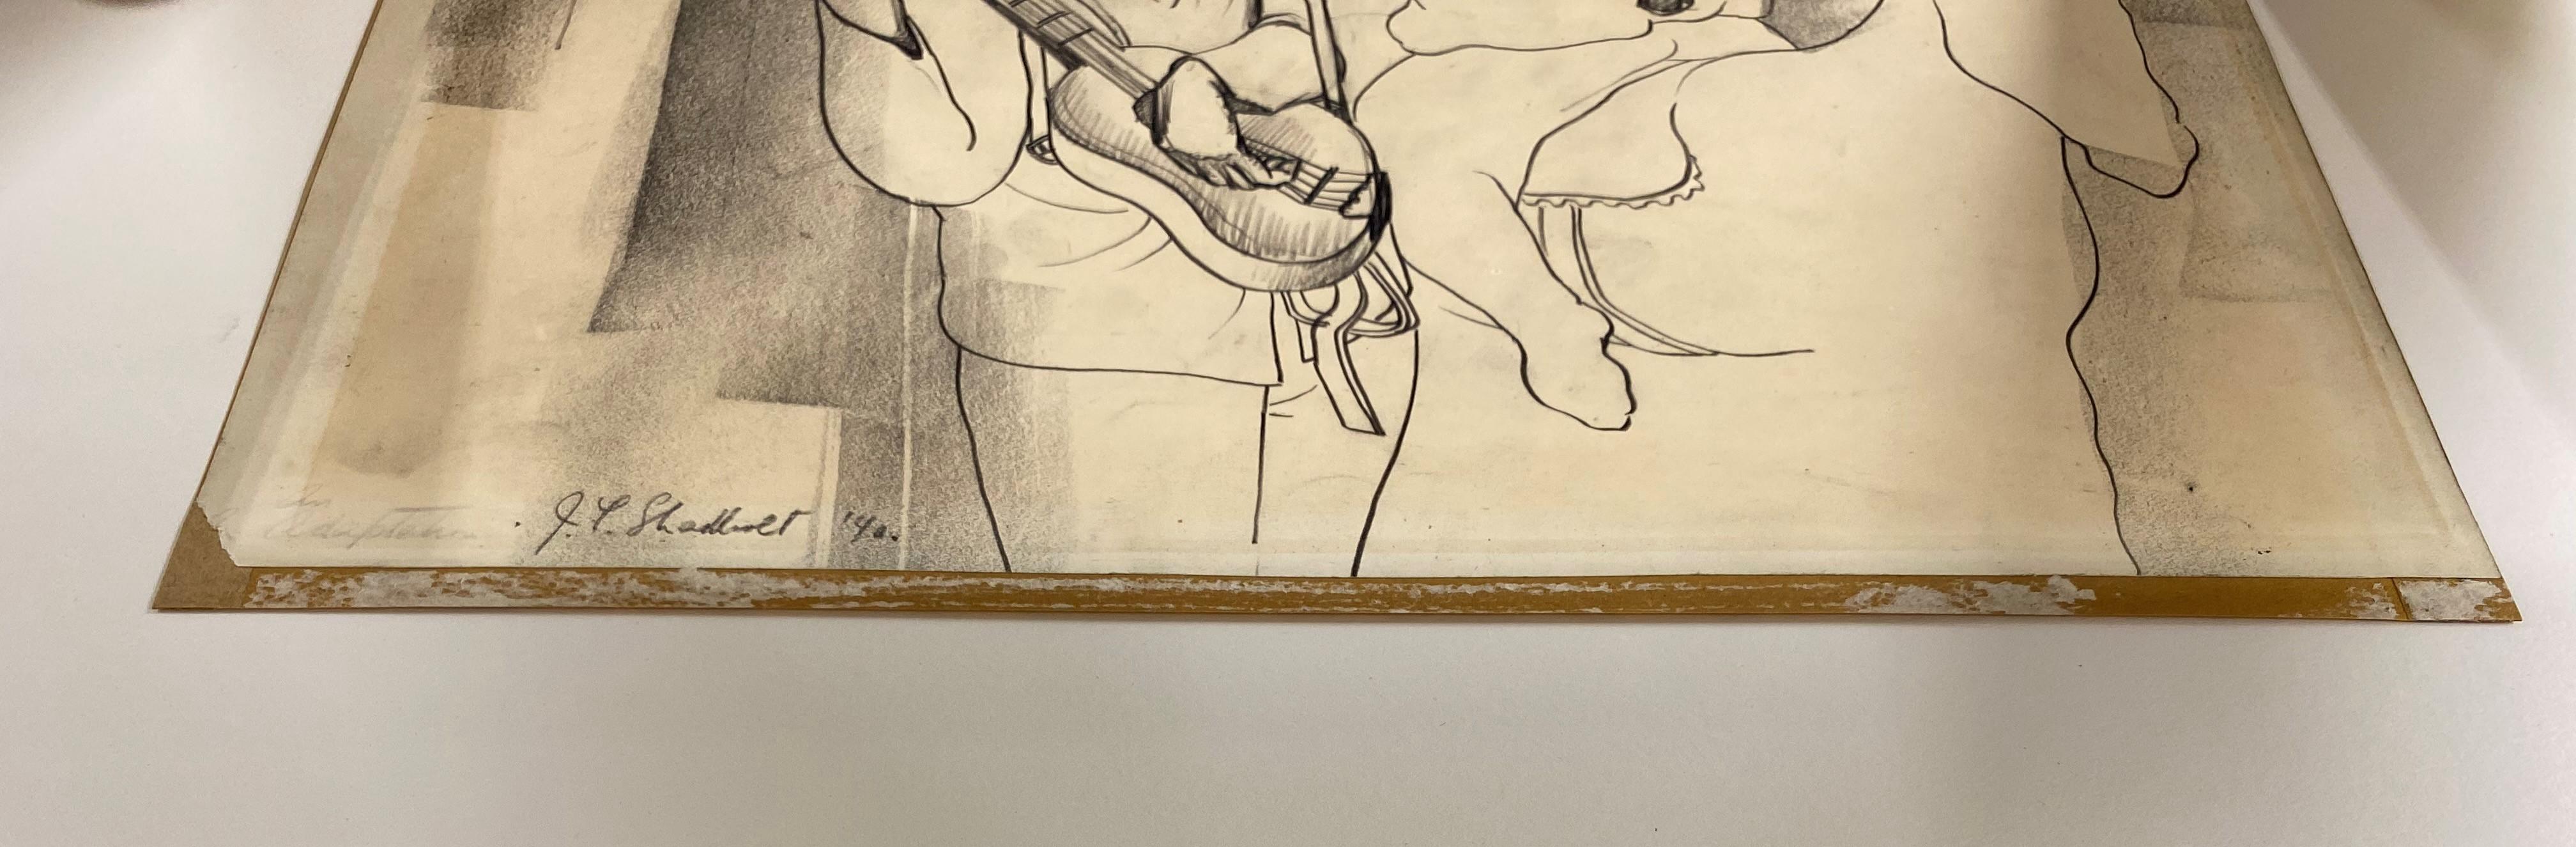 A fine graphite drawing of a circus clown with guitarist by British / Canadian artist Jack Leonard Shadbolt (1909-1998). Shadbolt was born in Shoeburyness, Essex, England and his family emigrated to British Columbia, Canada when he was very young.